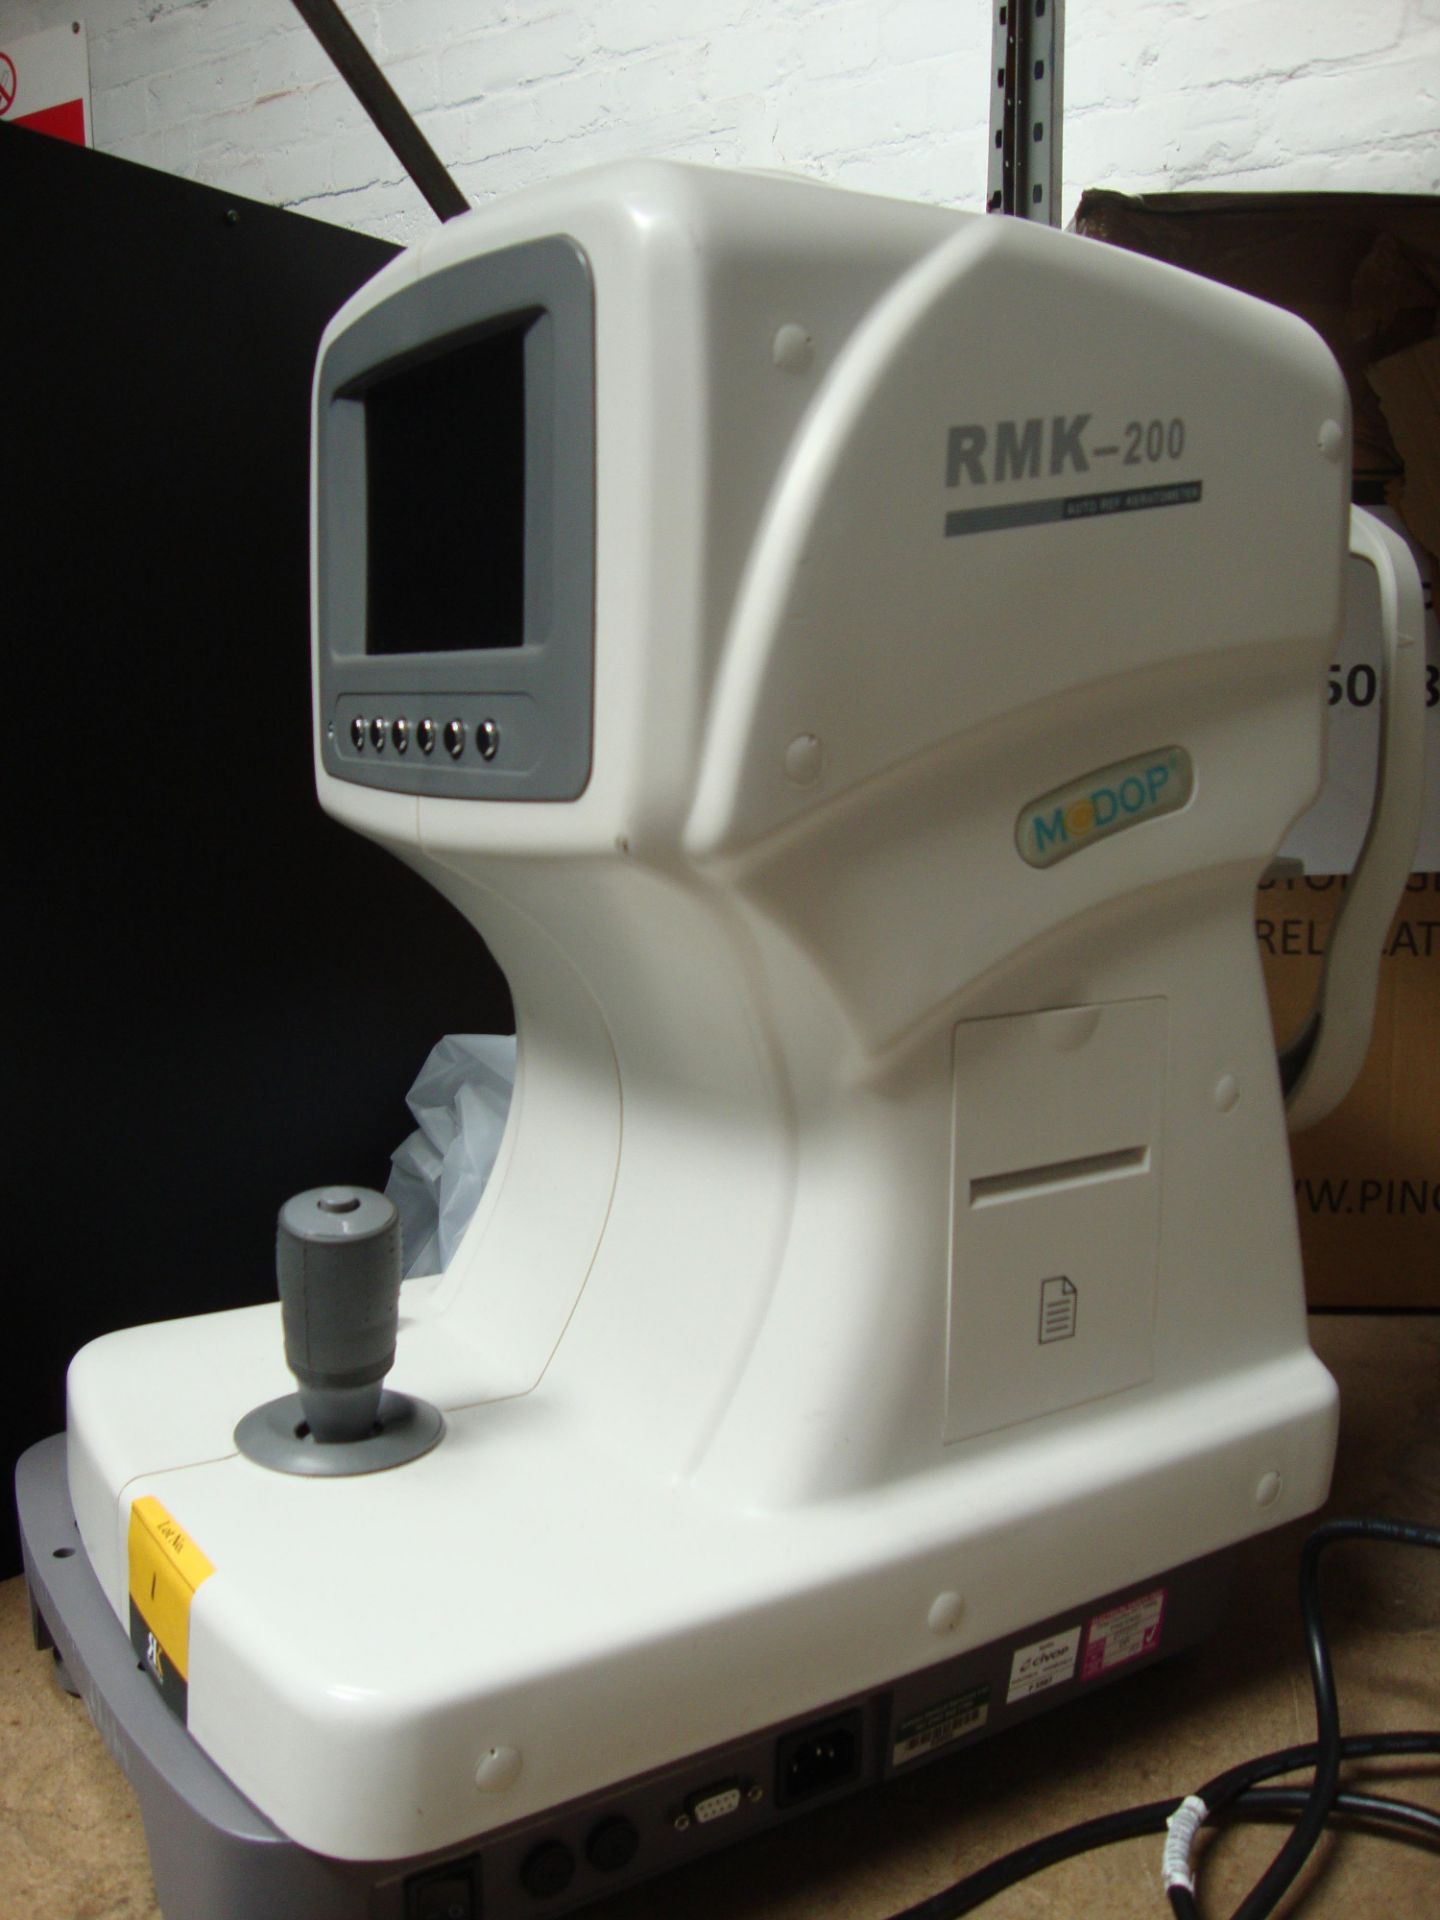 RMK-200 autorefractometer keratometer All the lots in this auction are being sold on behalf of - Image 3 of 4